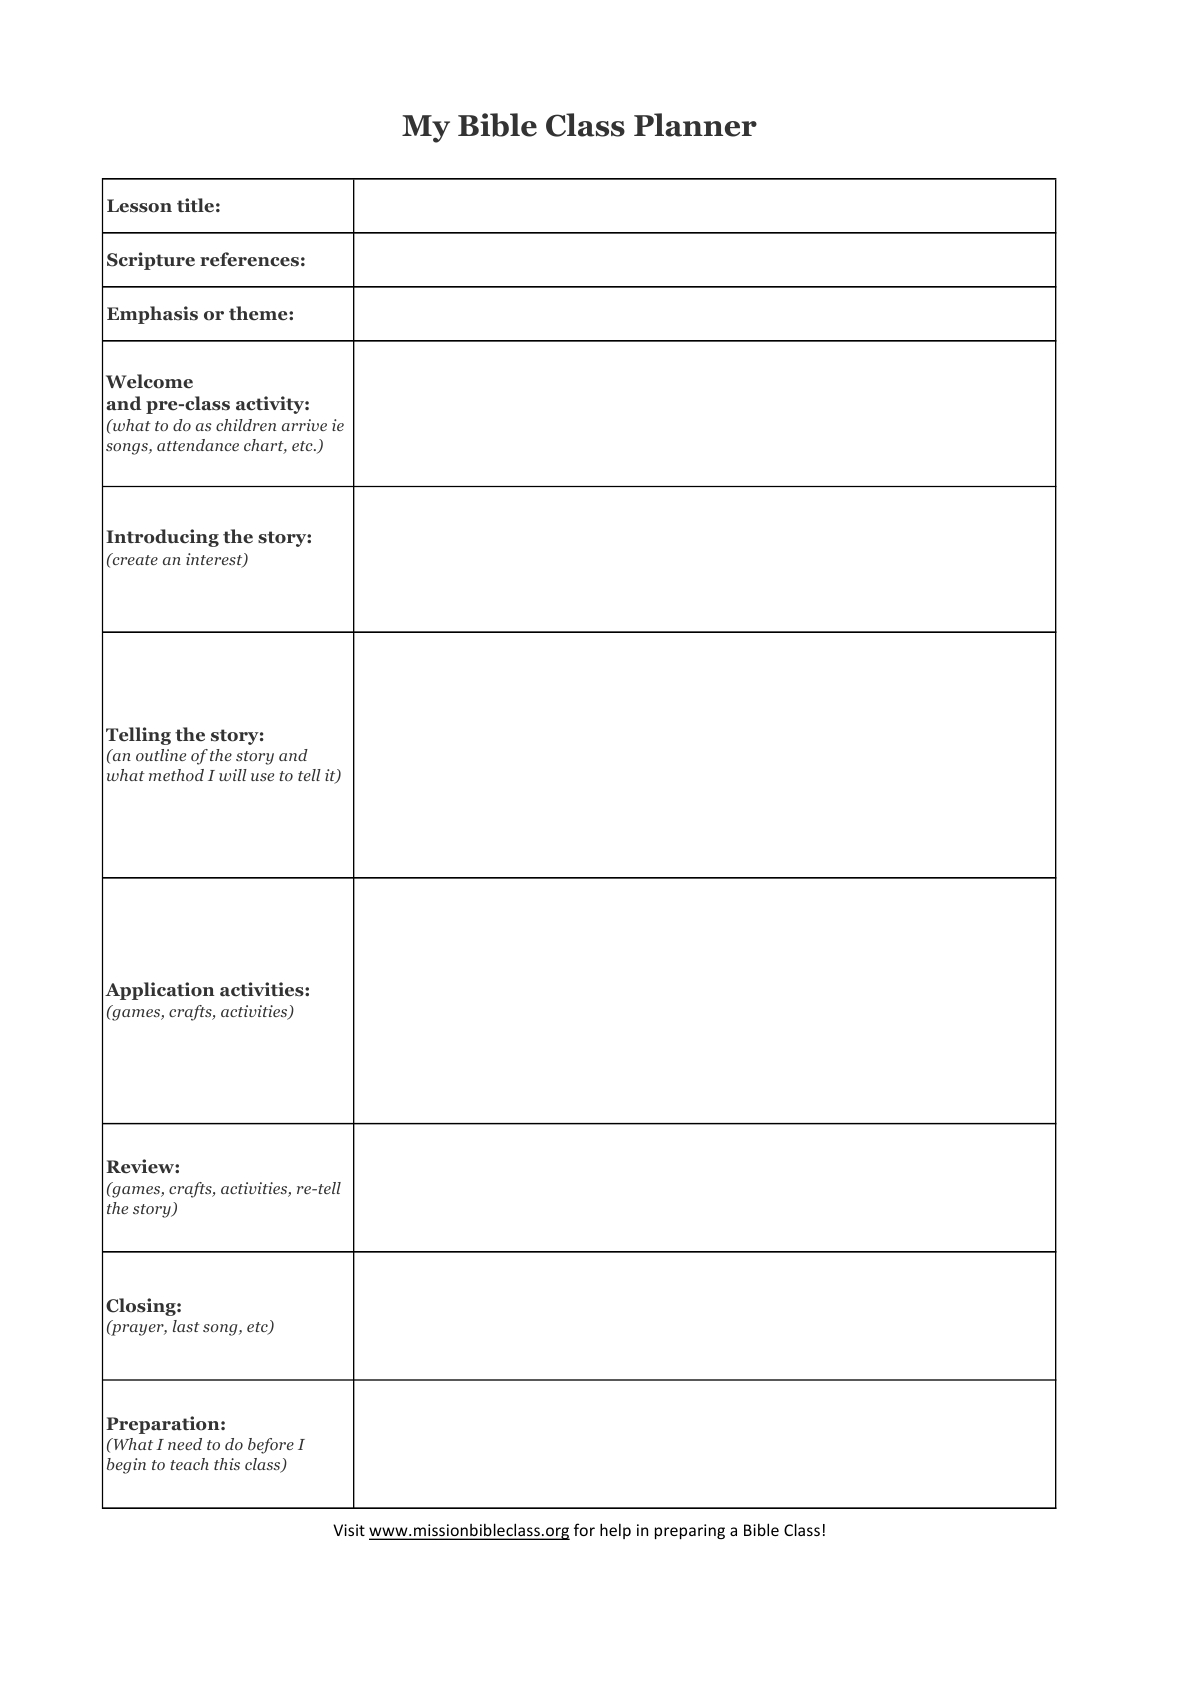 Blank Lesson Plan Templates To Print | Lesson Planning | Pinterest  Template Printable For Monthly Calendar Lesson Plans For Childrens Church